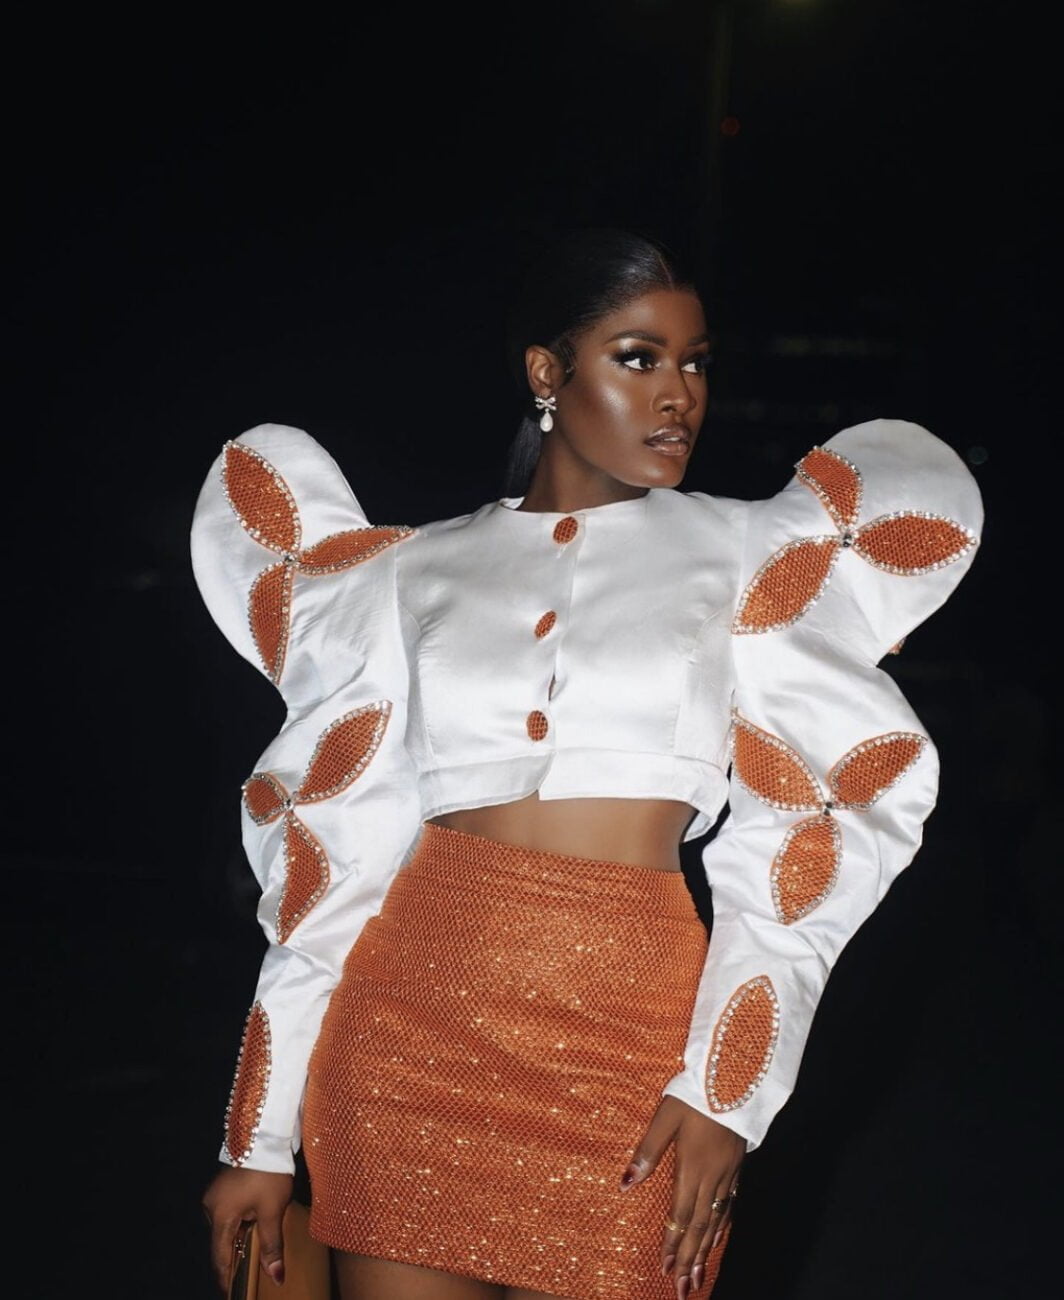 High fashion moment: Alex Unusual in a bold high shouldered and puffy sleeve outfit.